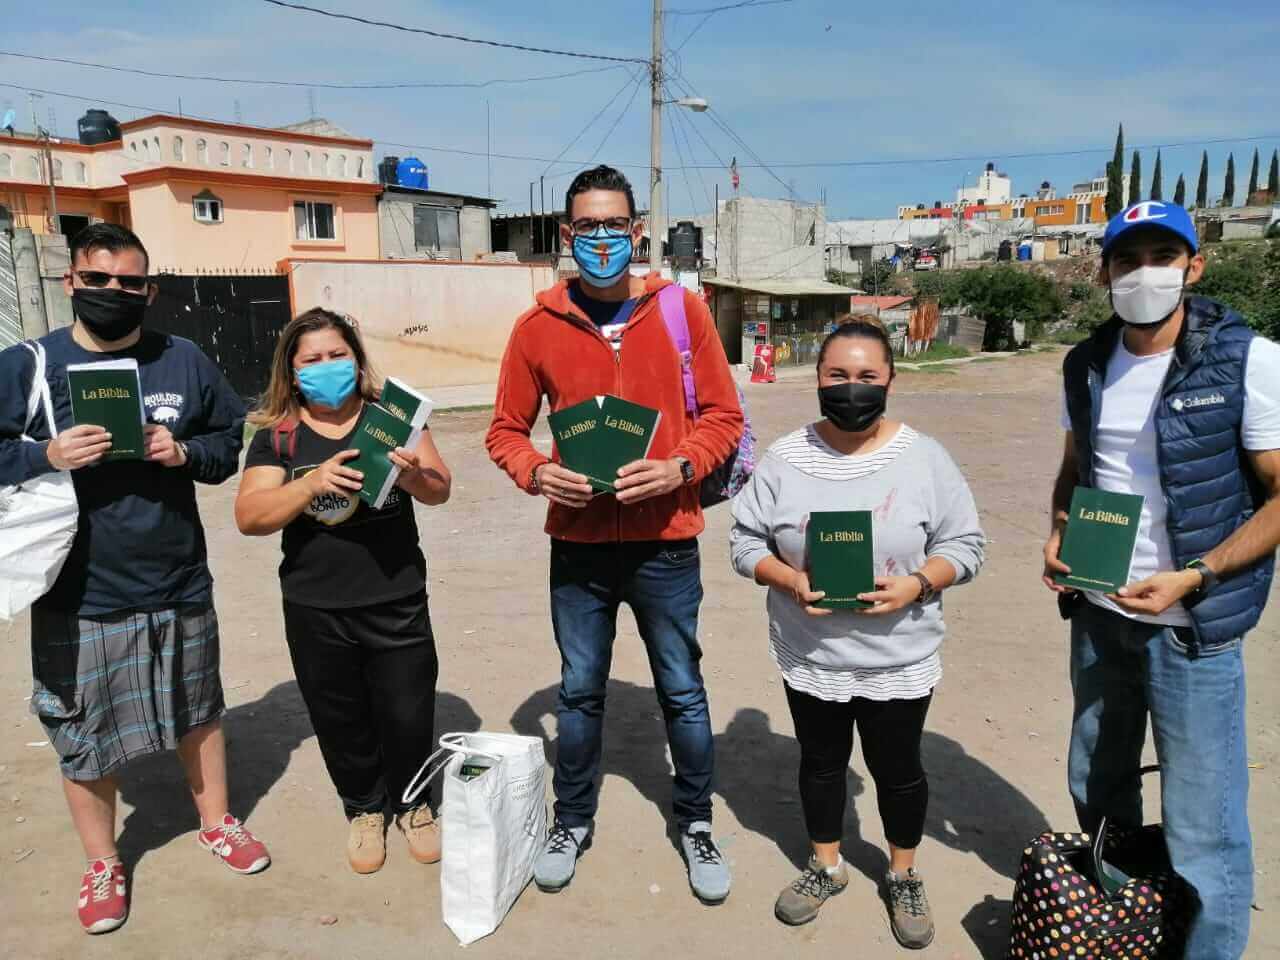 Raquel and her husband Gabriel with a group holding books